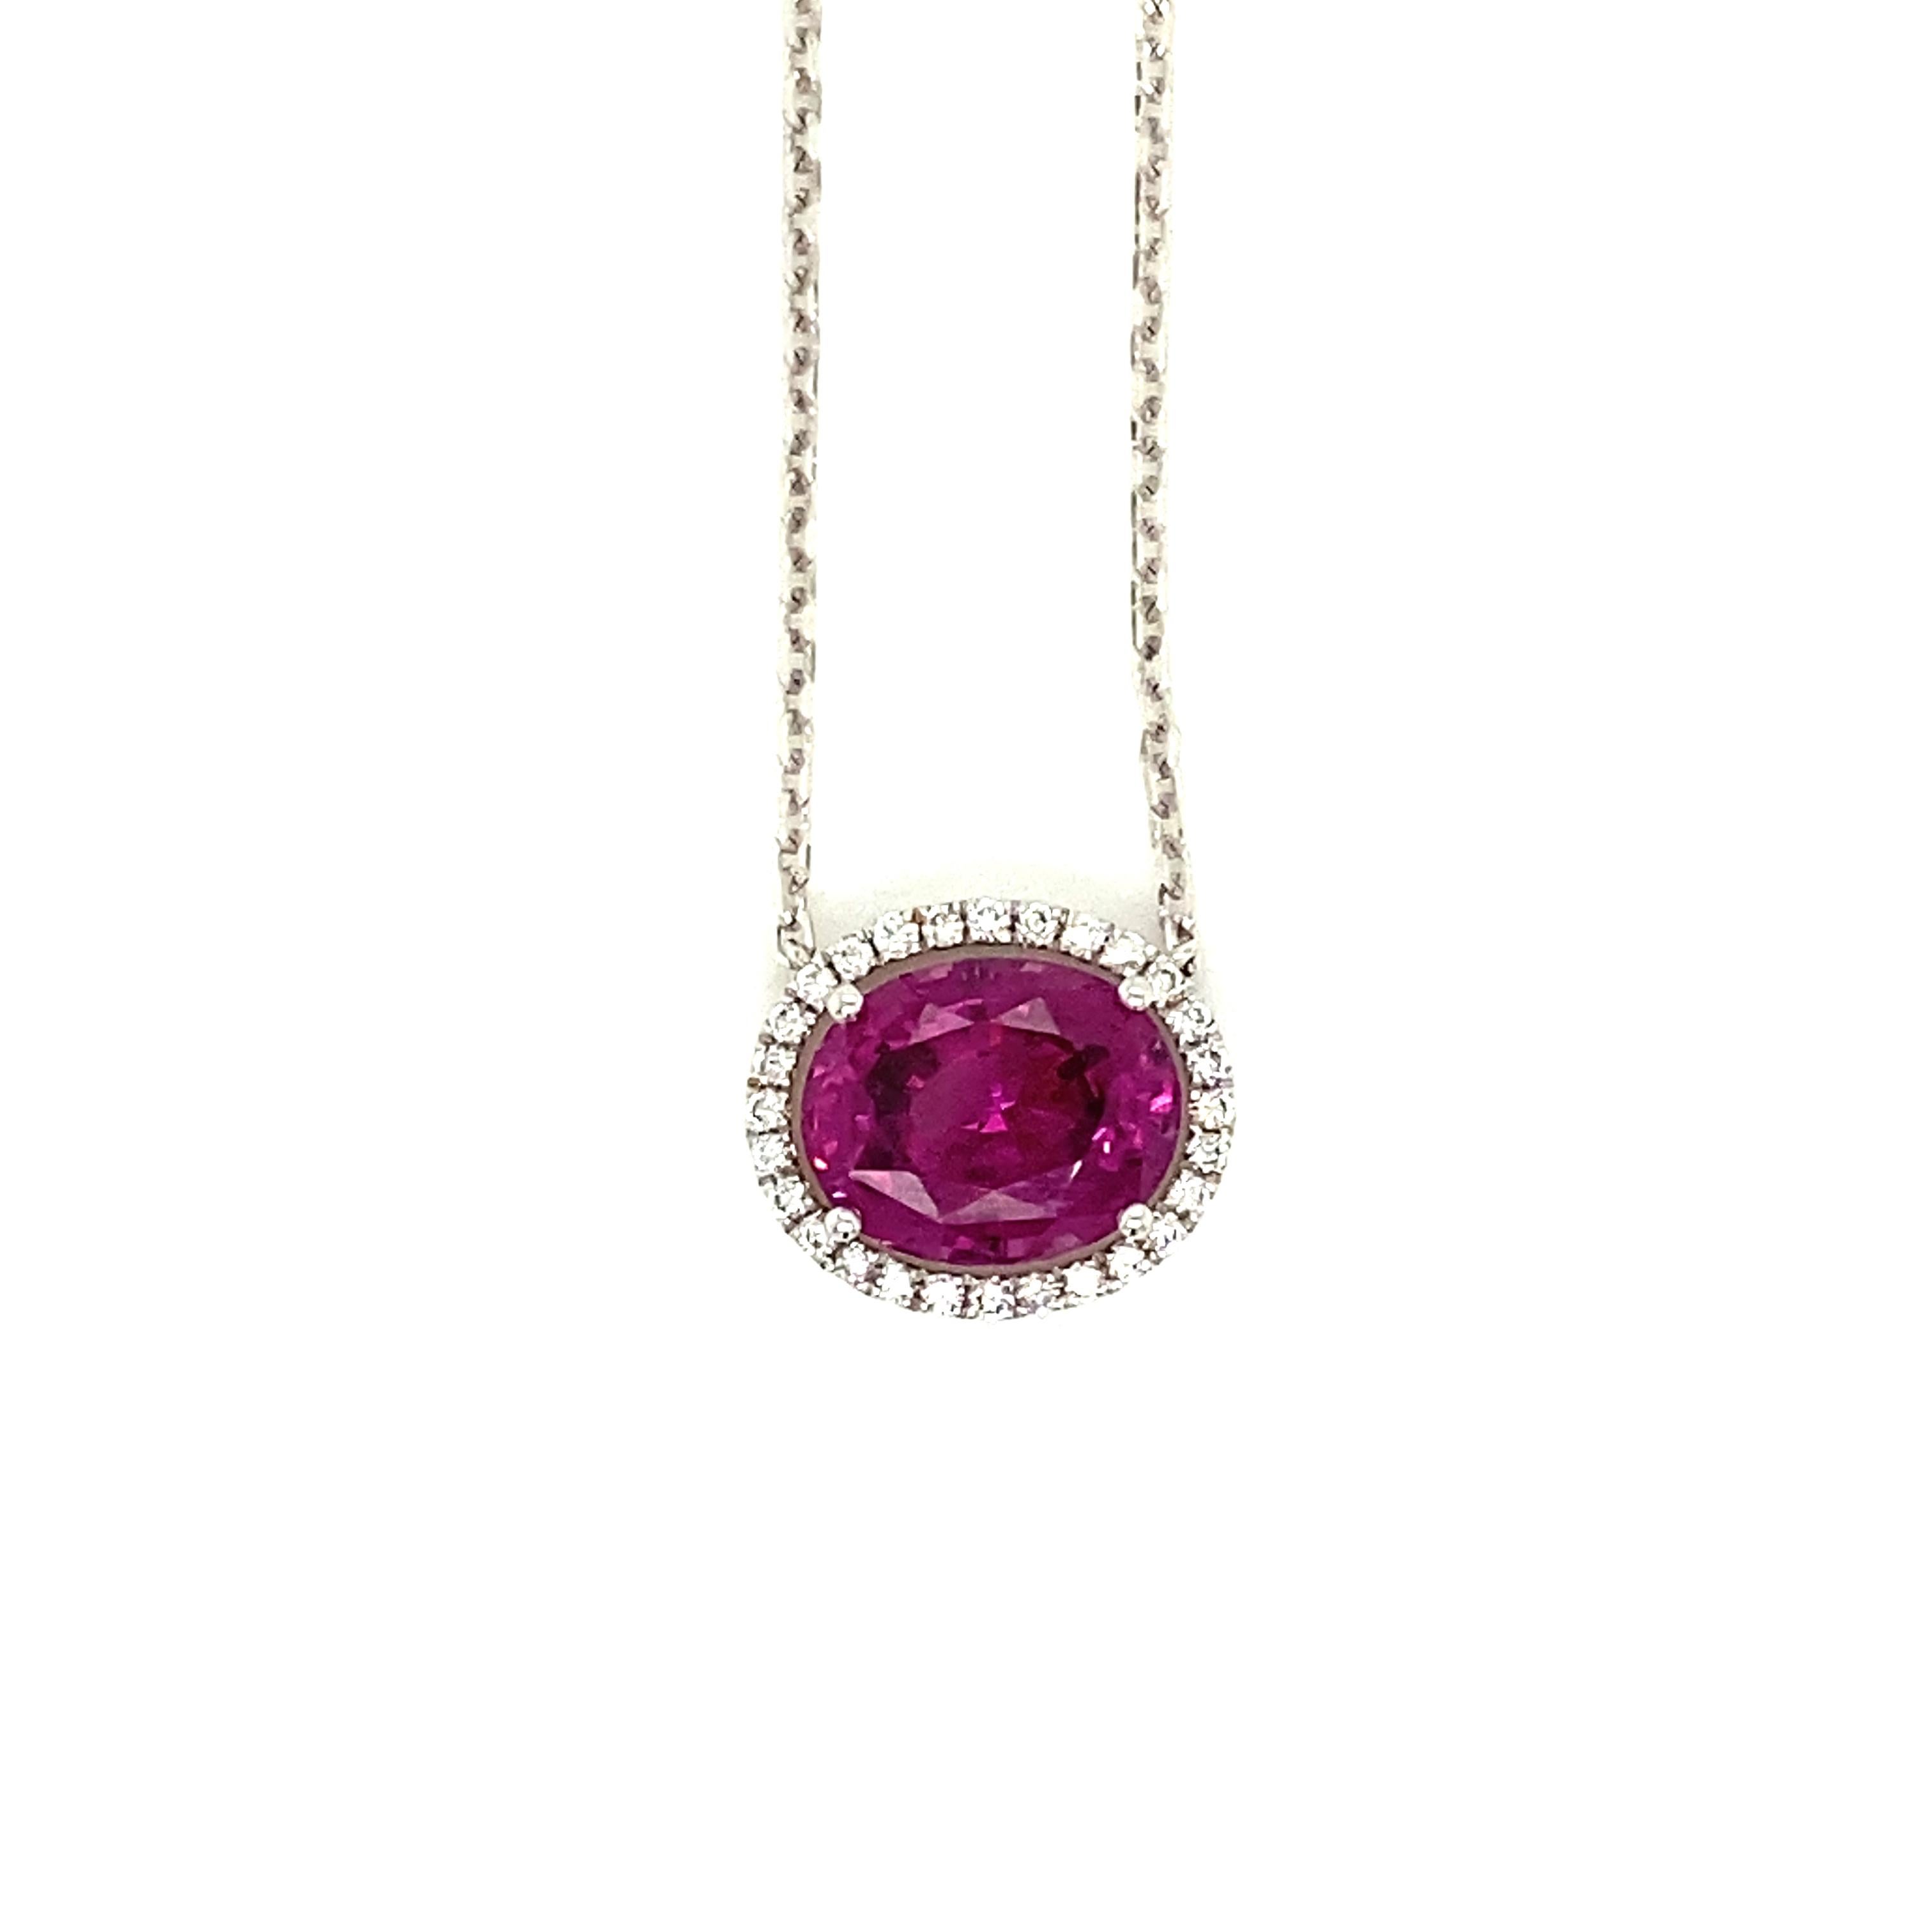 3.75 Carat Oval-Cut Vivid Pink-Purple Garnet and White Diamond Pendant Necklace:

A beautiful pendant necklace, it features a 3.75 carat oval-cut vivid pink-purple garnet in the centre surrounded by a halo of white round-brilliant cut diamonds